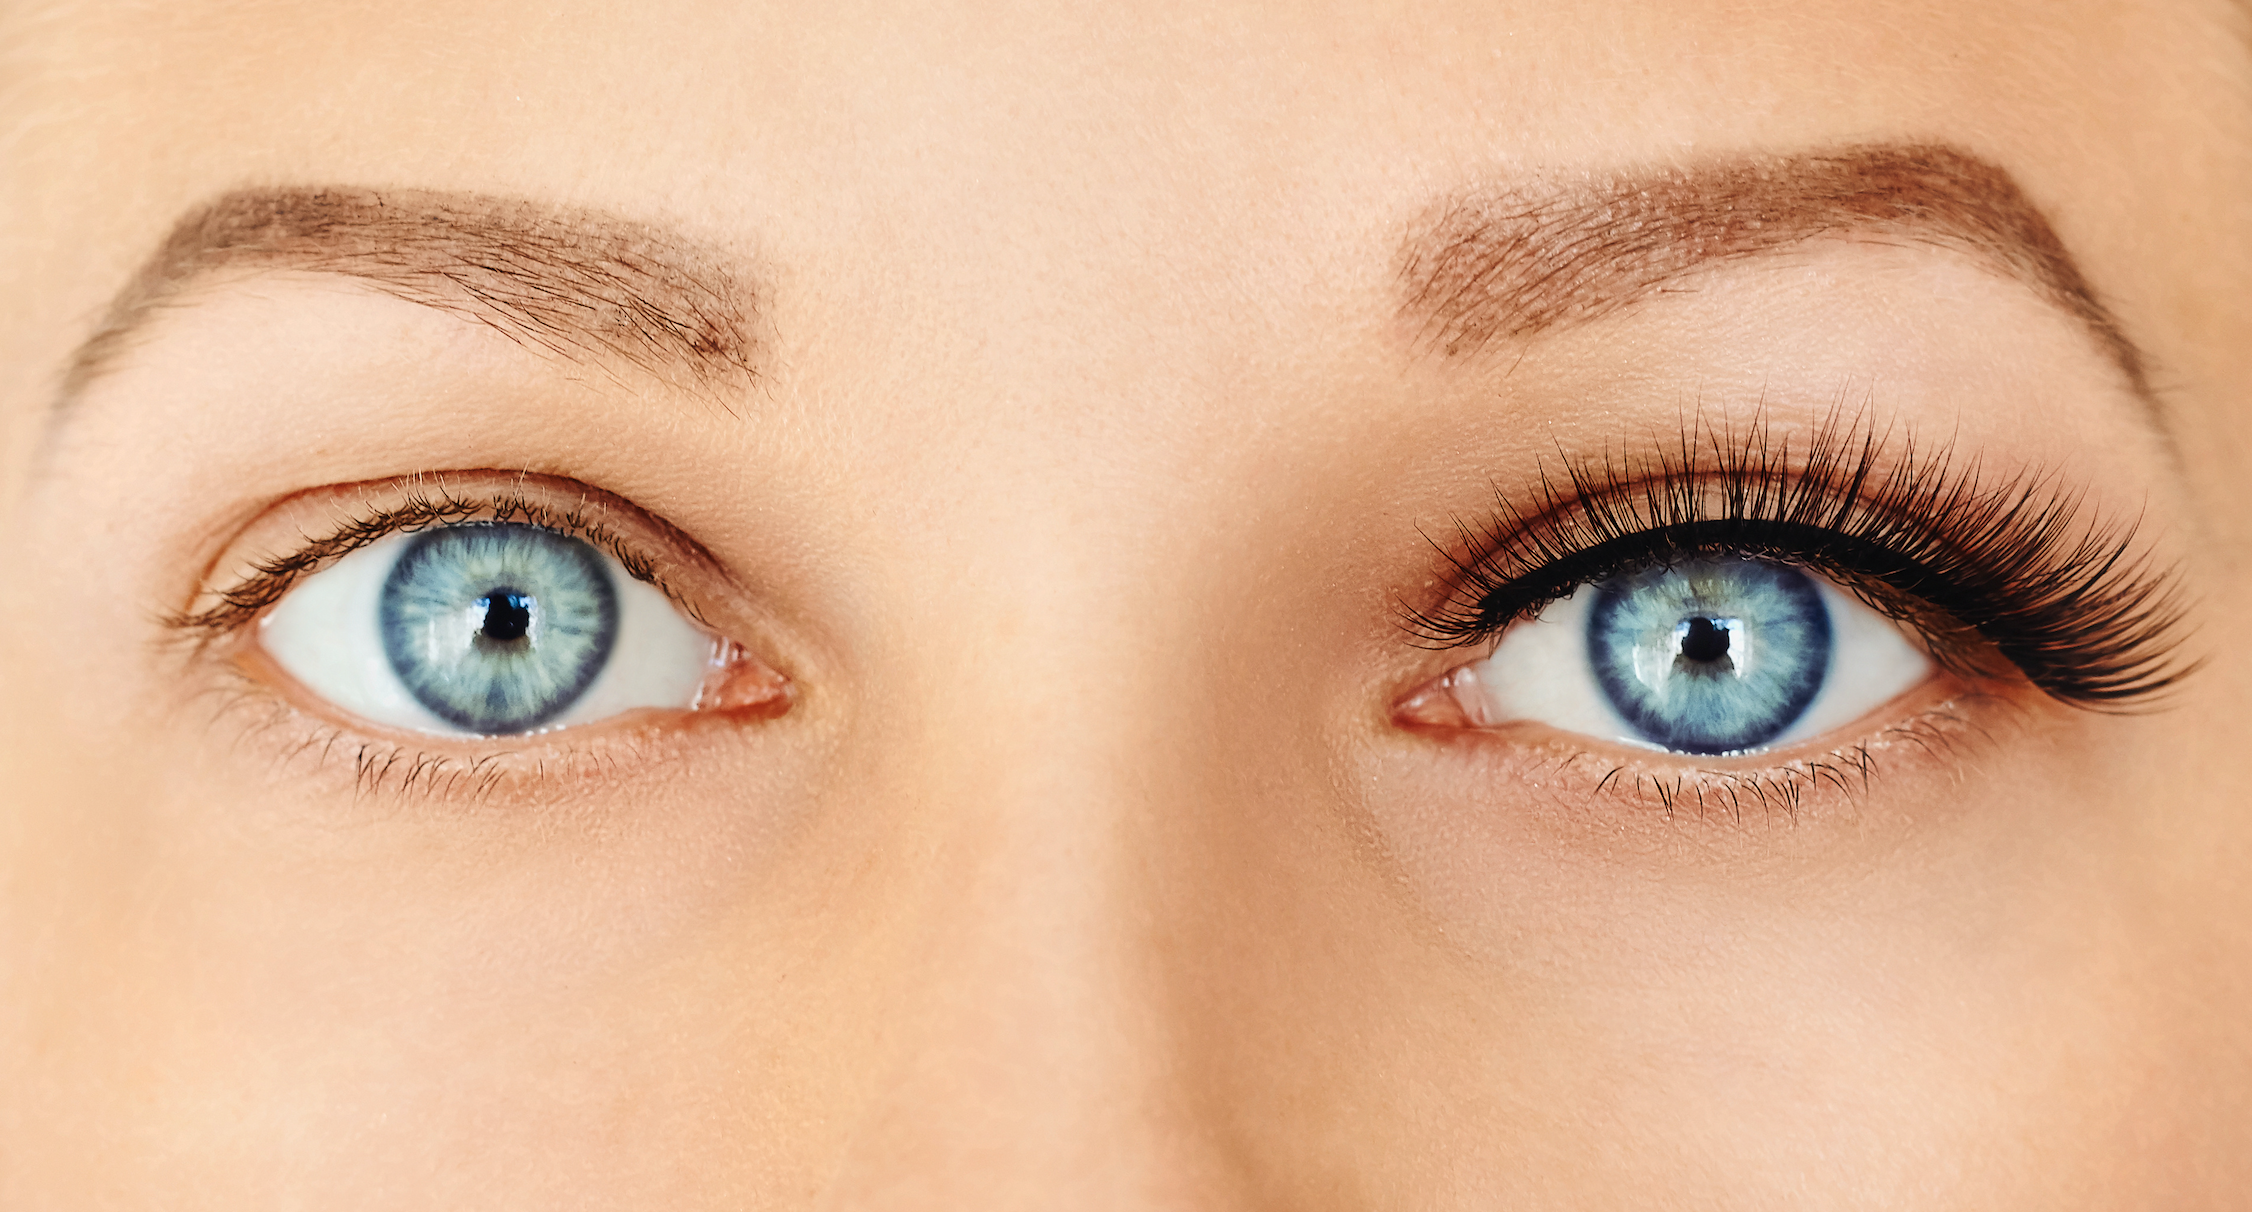 An example of one eye with lash extensions and one without